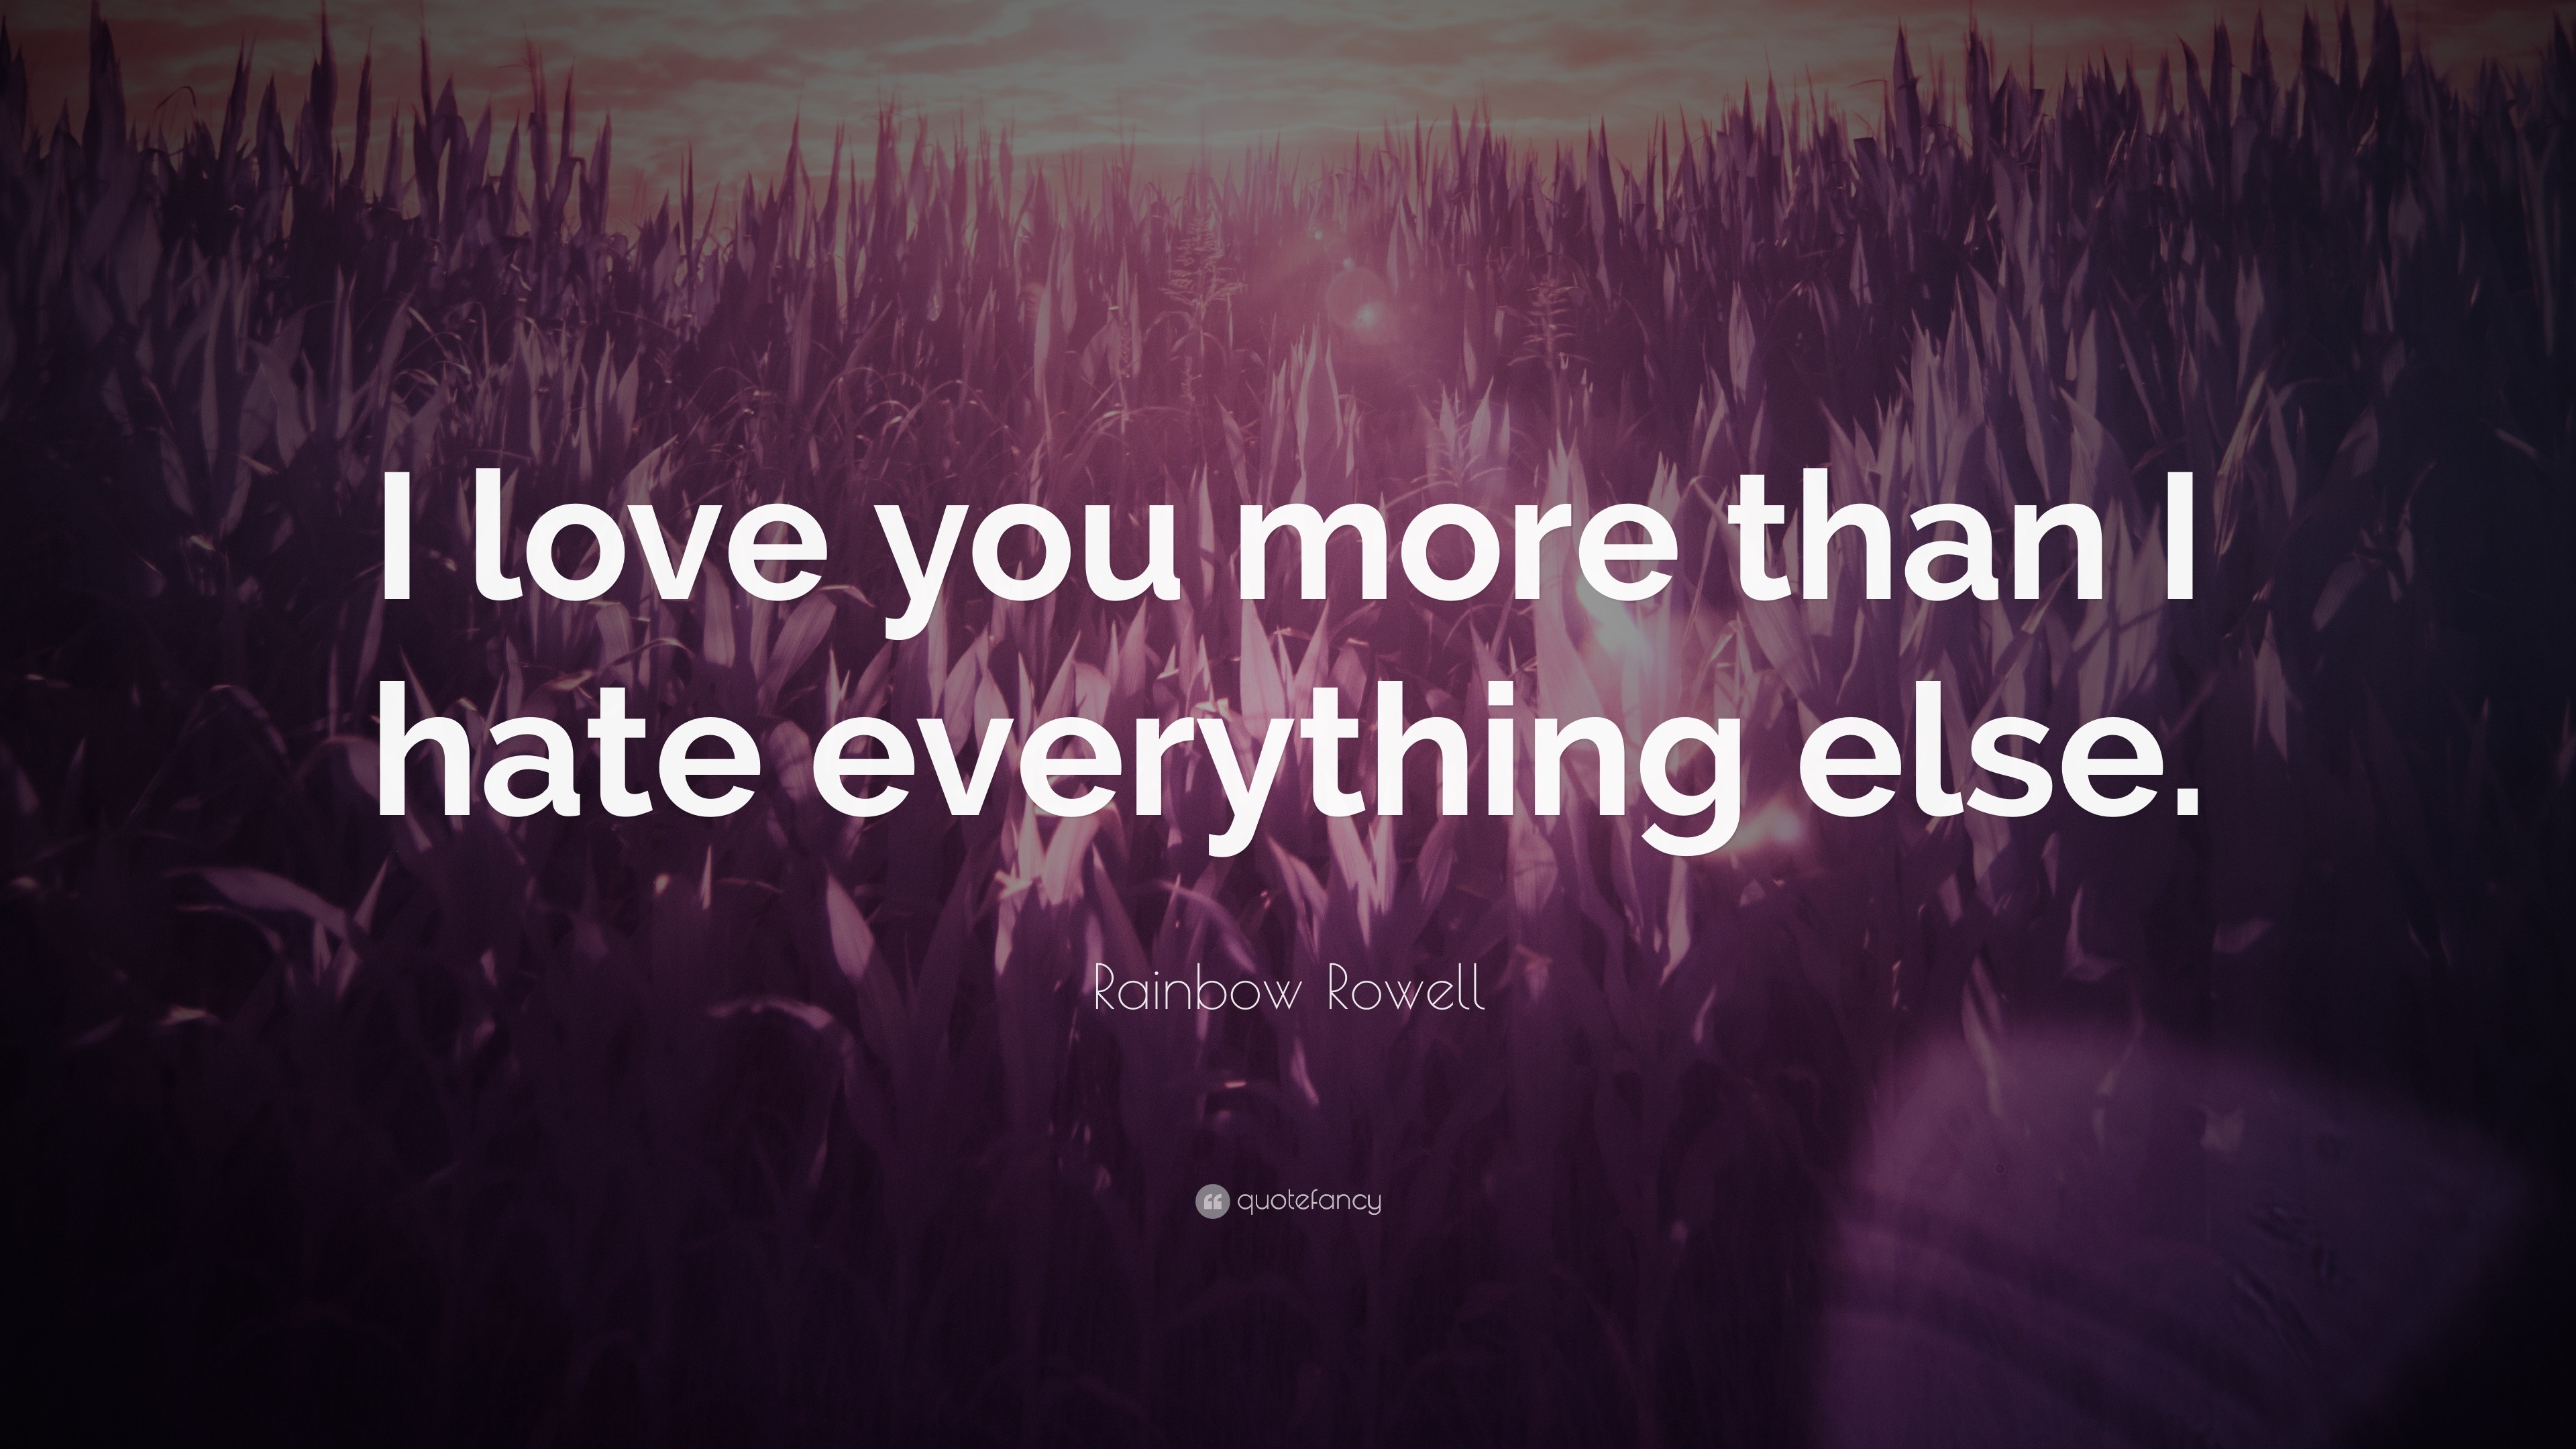 Rainbow Rowell Quote “I love you more than I hate everything else ”